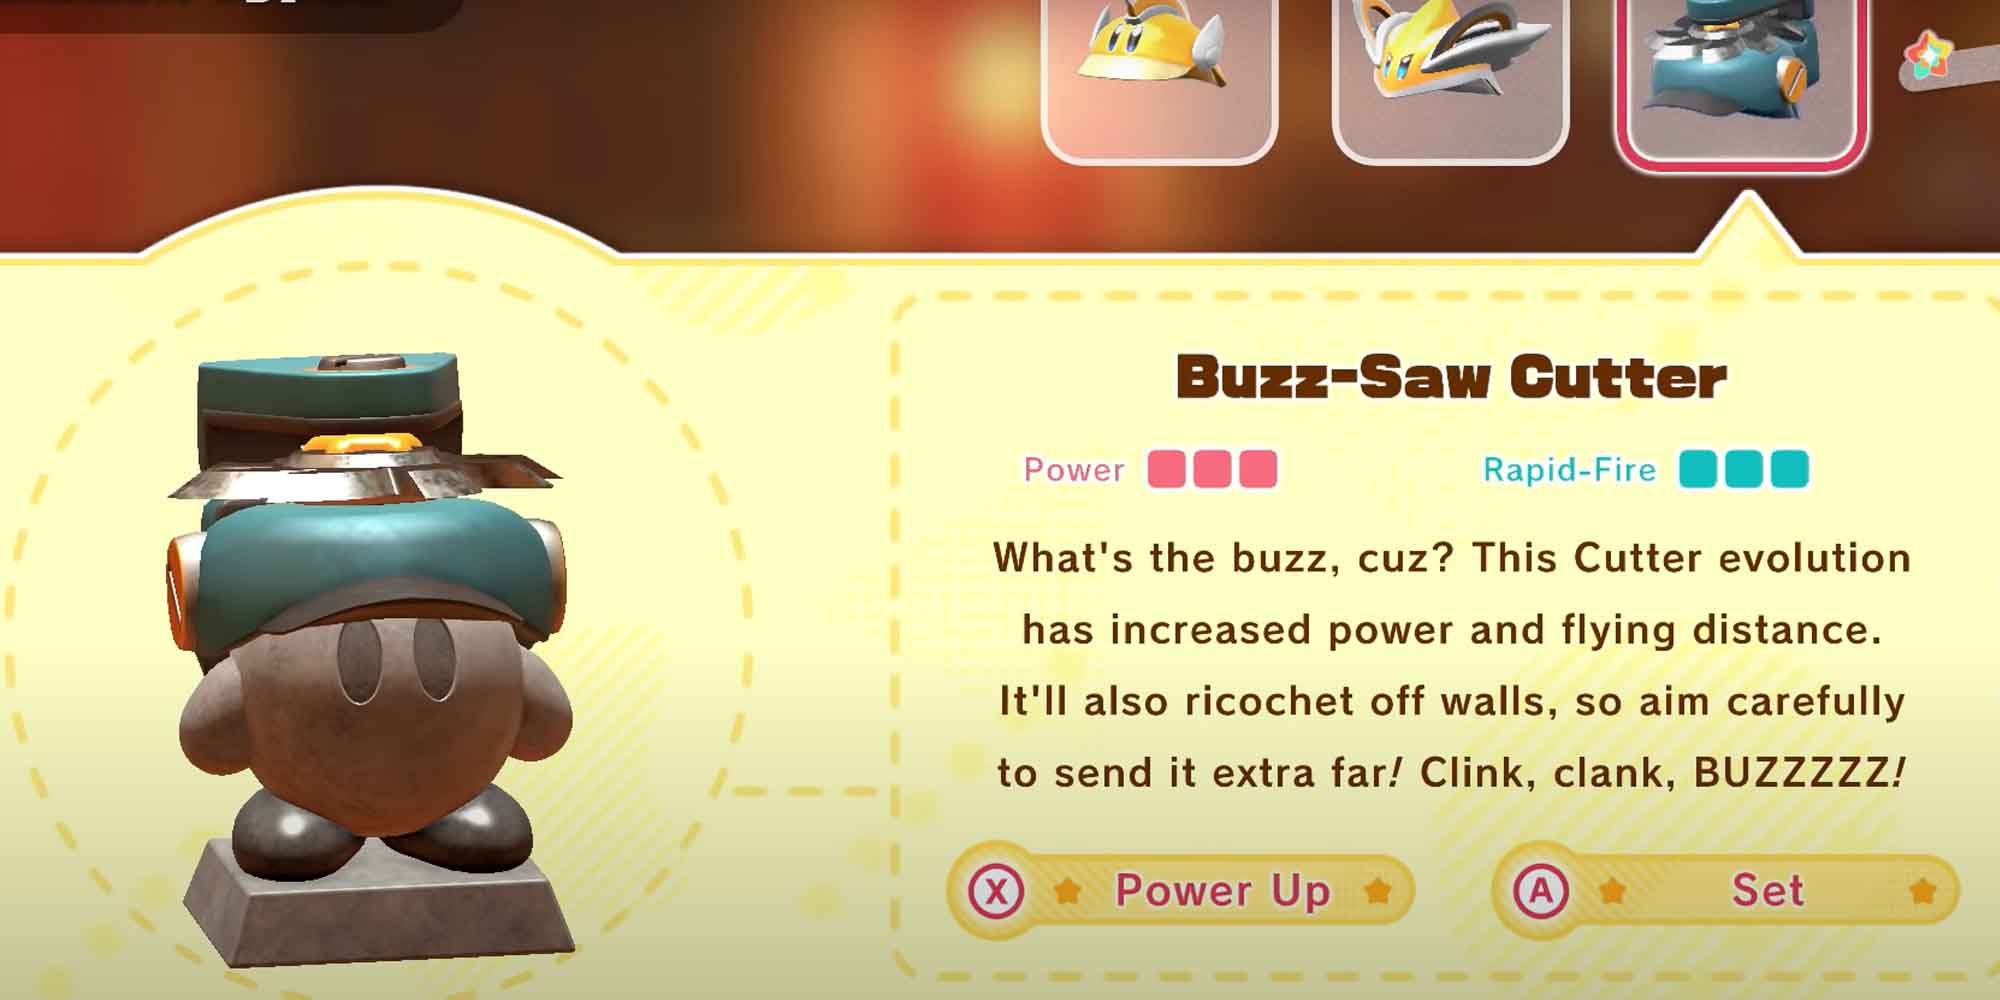 The Buzz-Saw Cutter upgrade for the Cutter copy ability in Kirby and the Forgotten Land